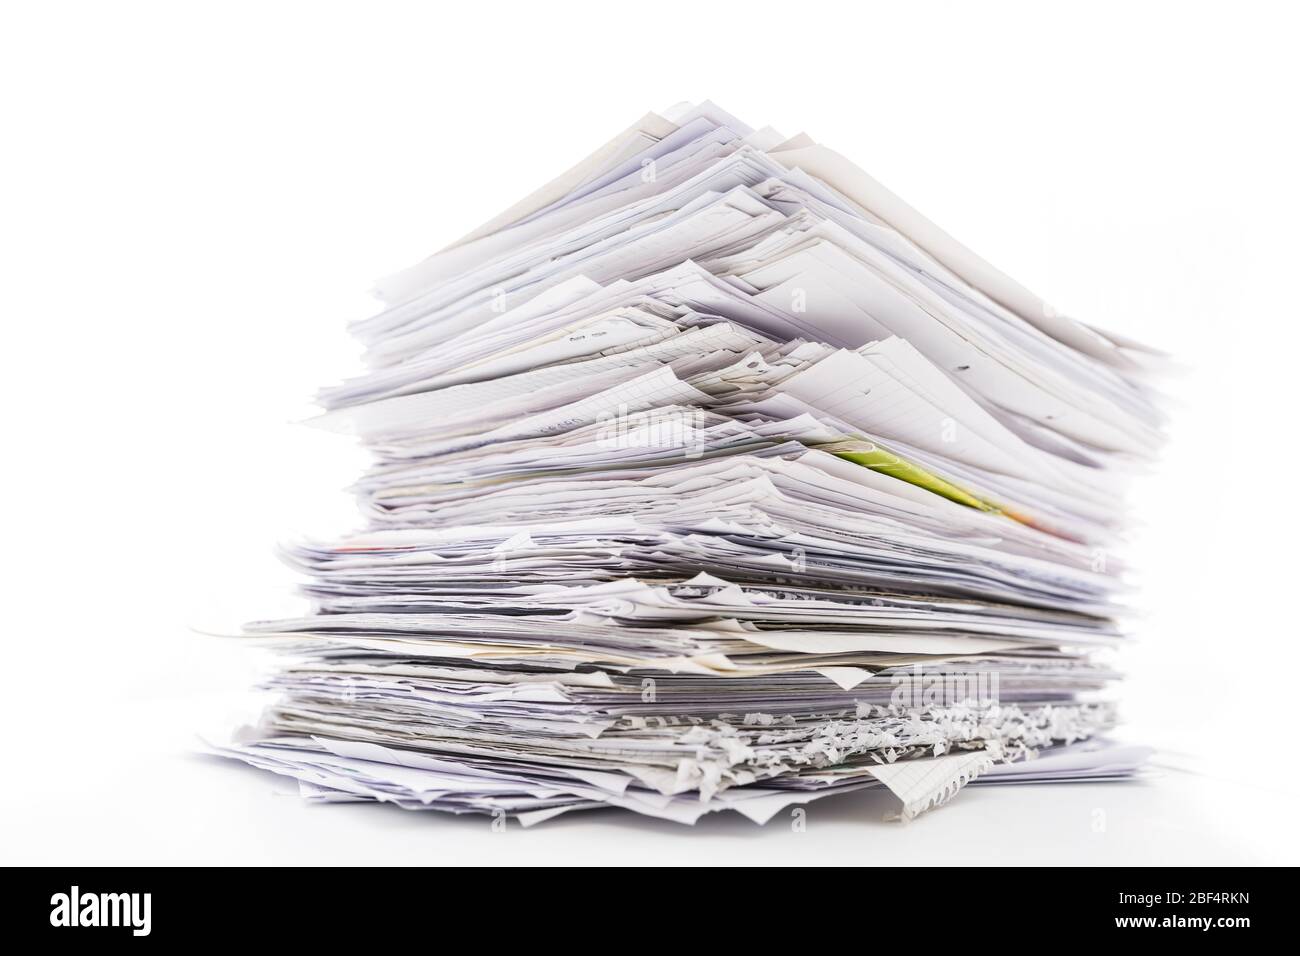 Large pile of waste paper isolated on white. Ready for recycling Stock Photo